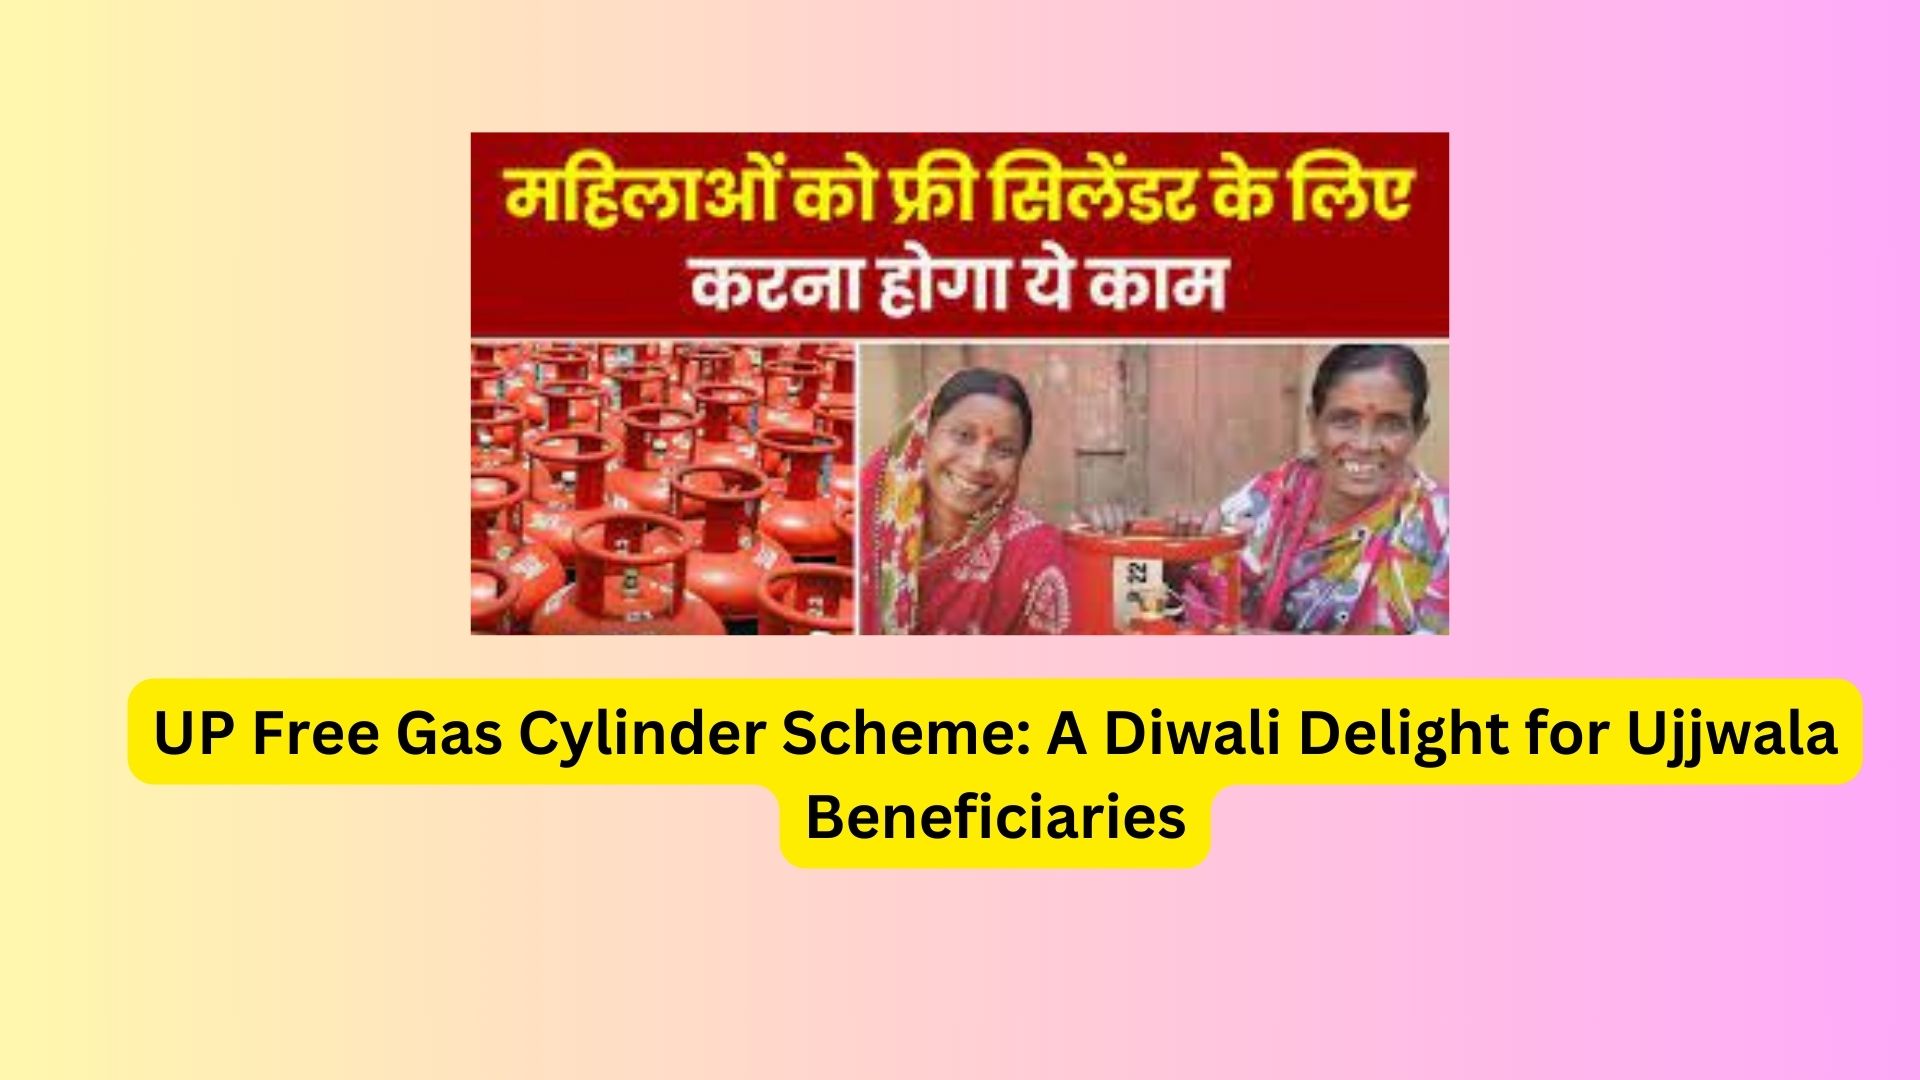 UP Free Gas Cylinder Scheme: A Diwali Delight for Ujjwala Beneficiaries